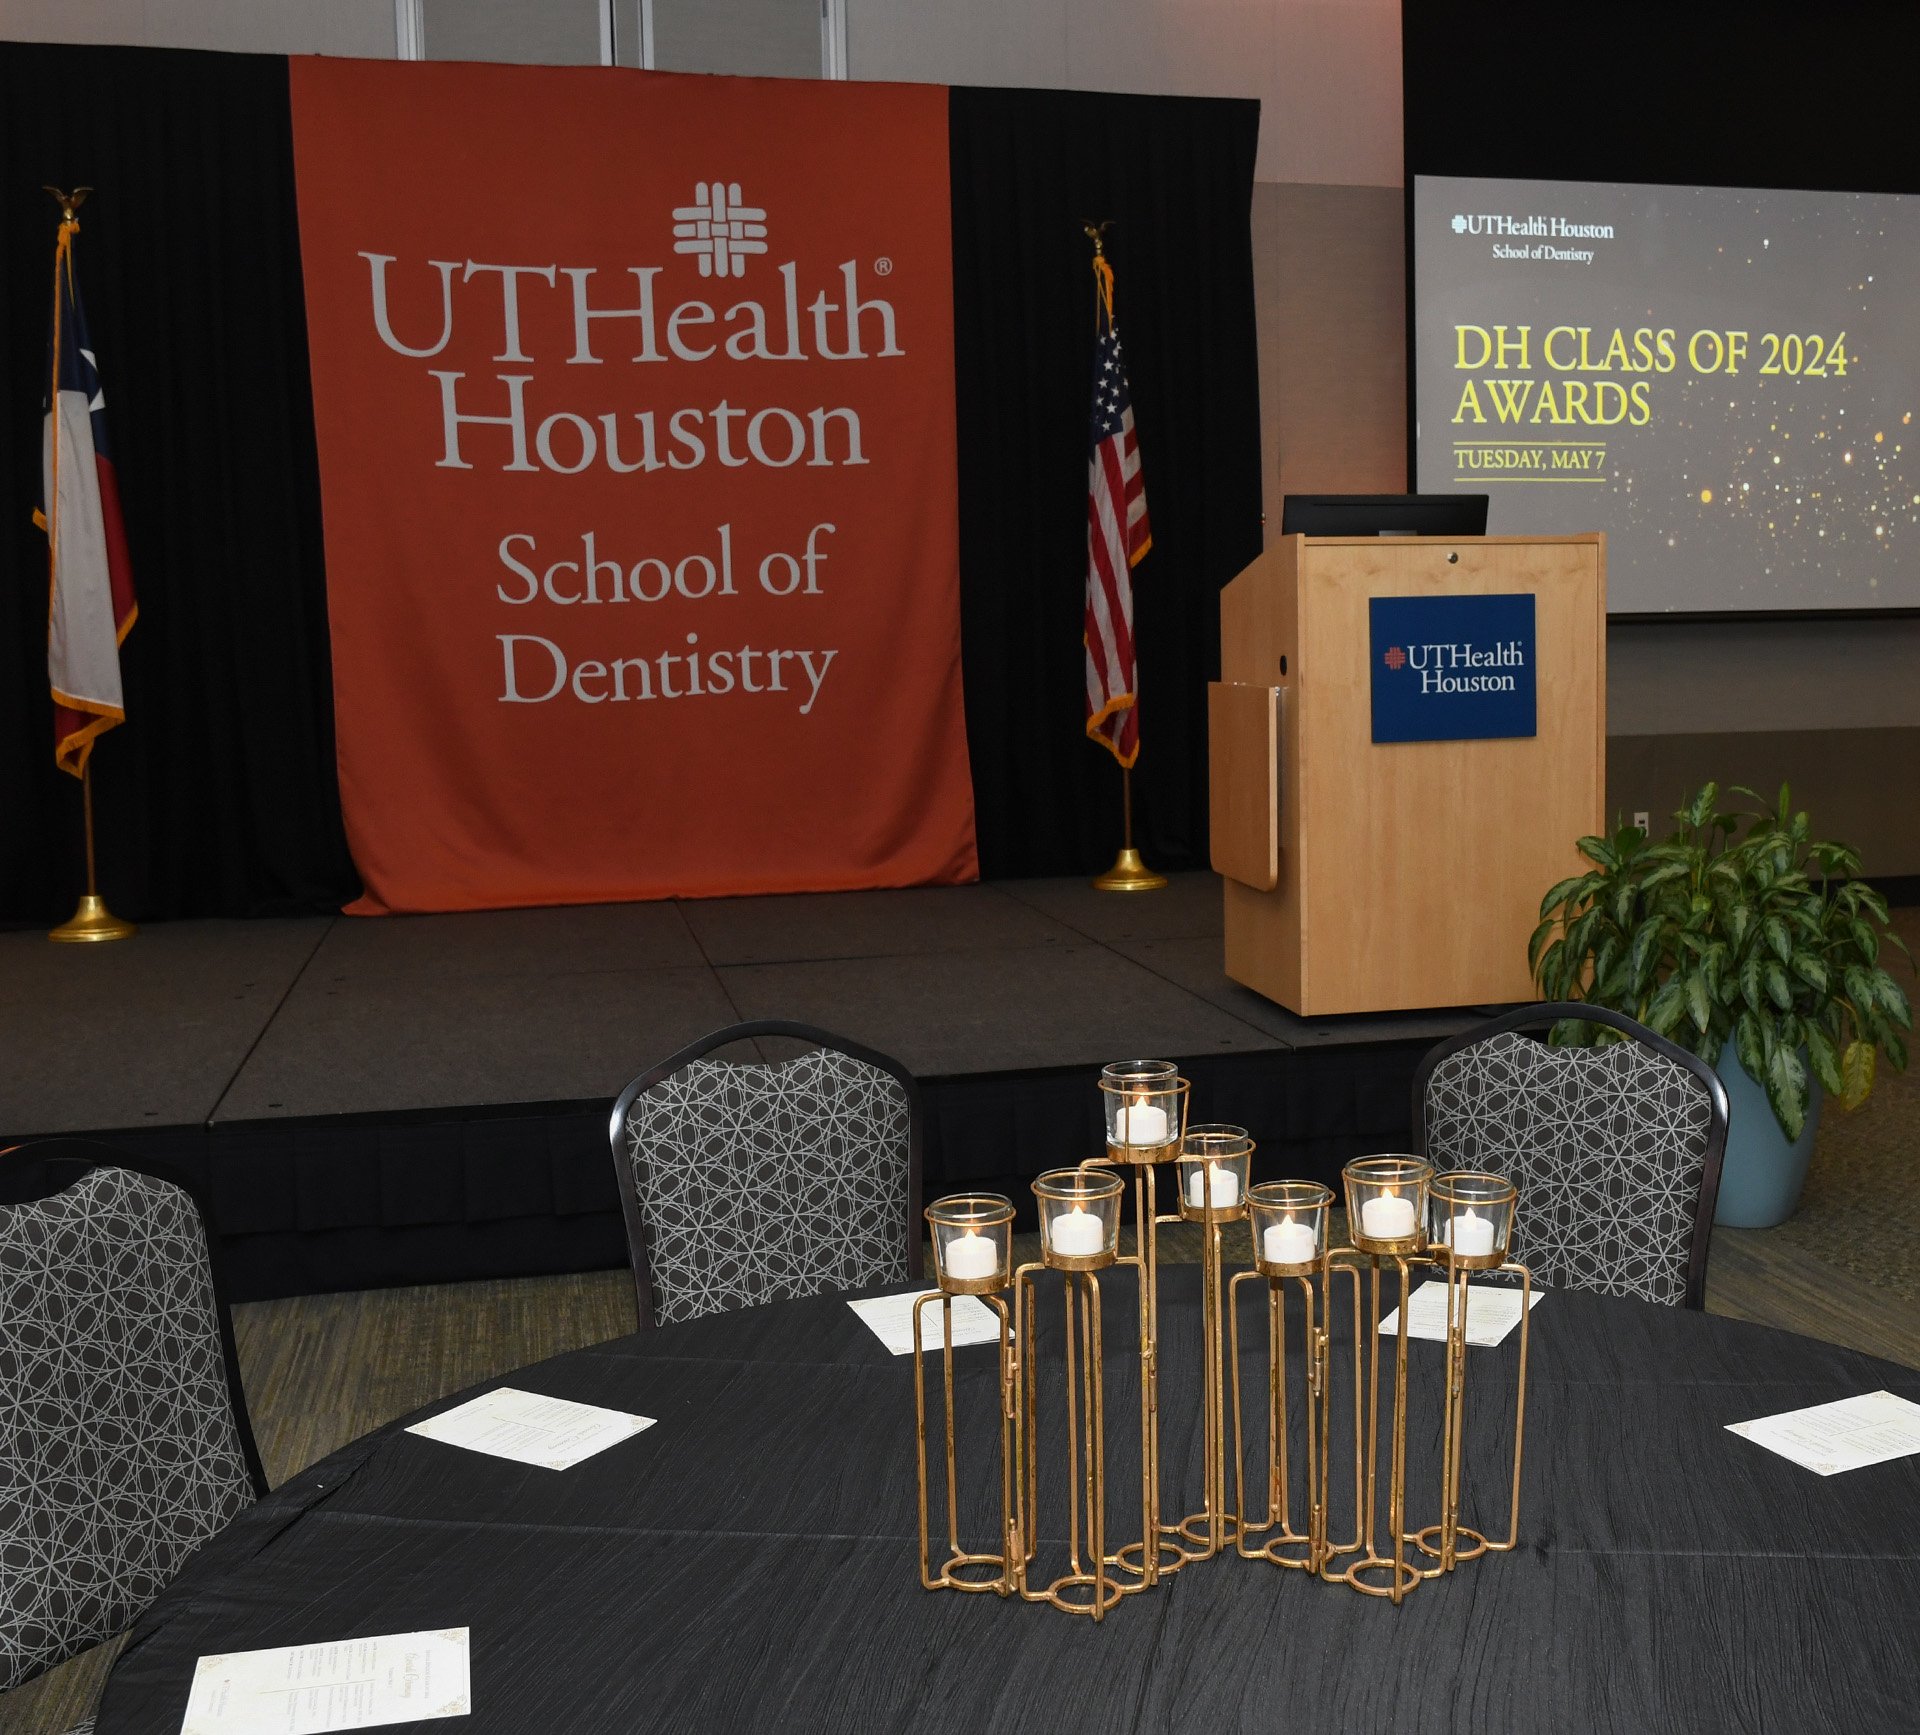 Decorations in the Denton A. Cooley, MD and Ralph C. Cooley, DDS University Life Center for the Dental Hygiene Class of 2024 Awards.